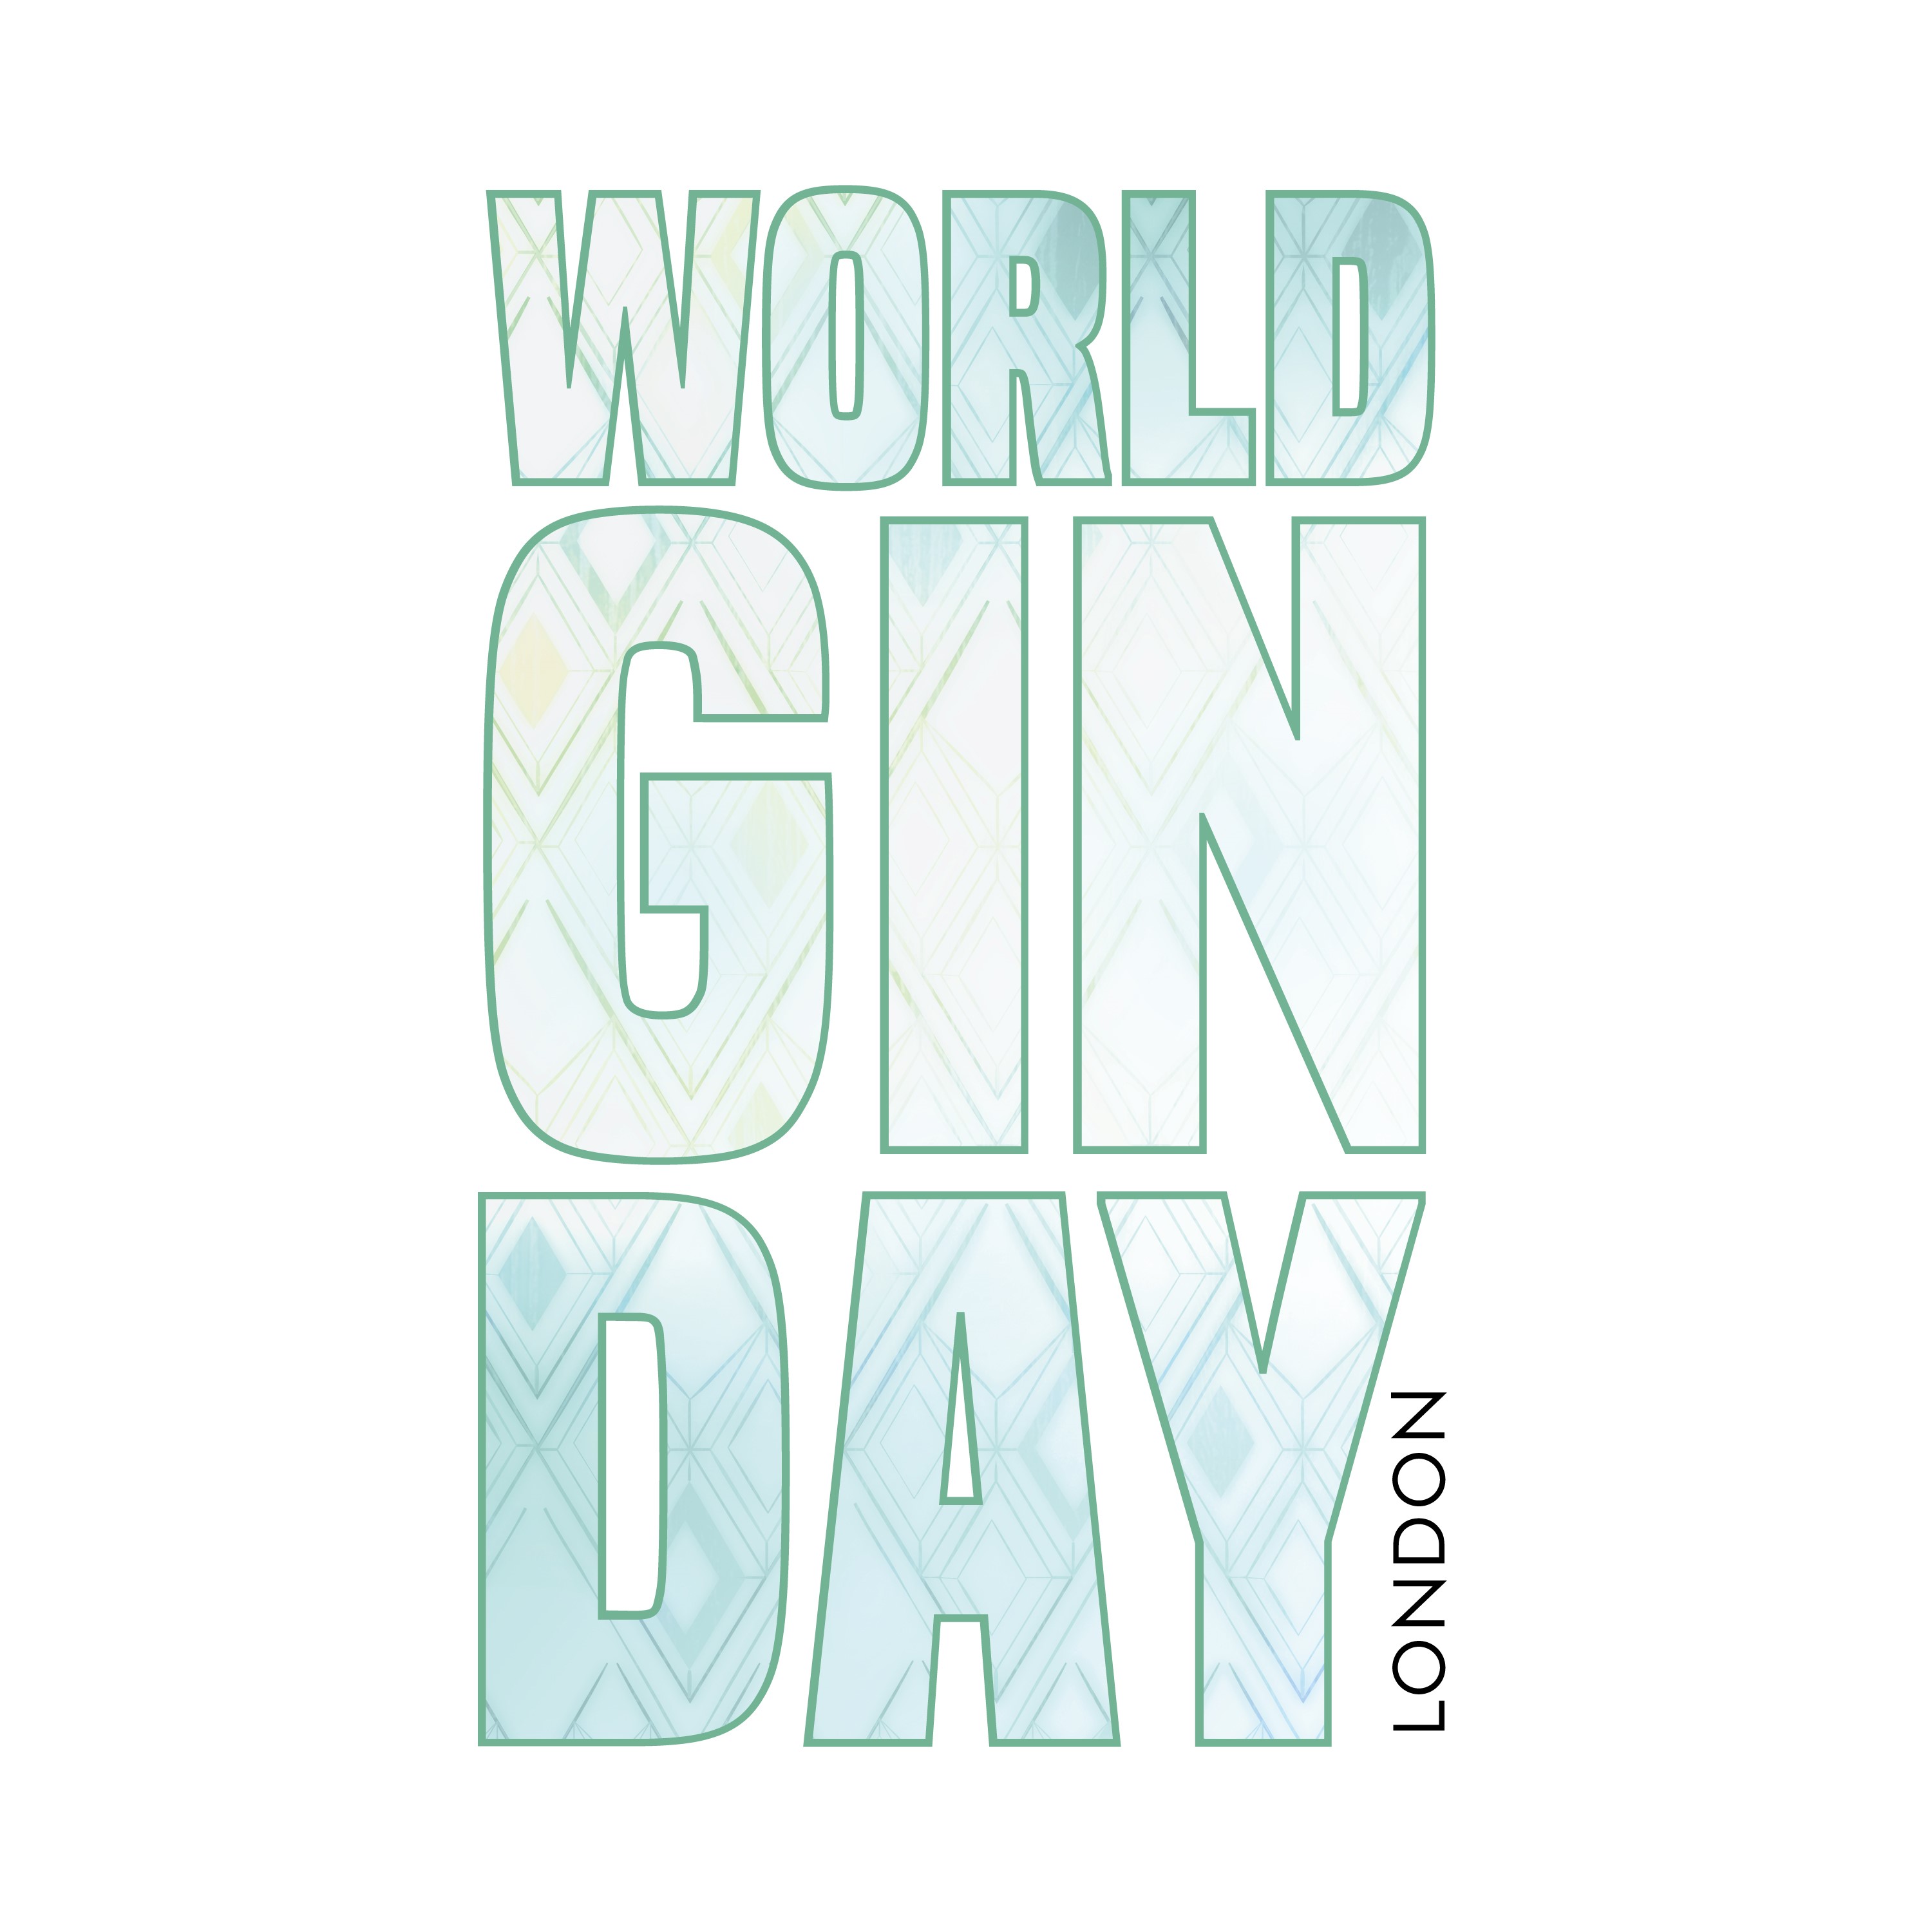 About World Gin Day